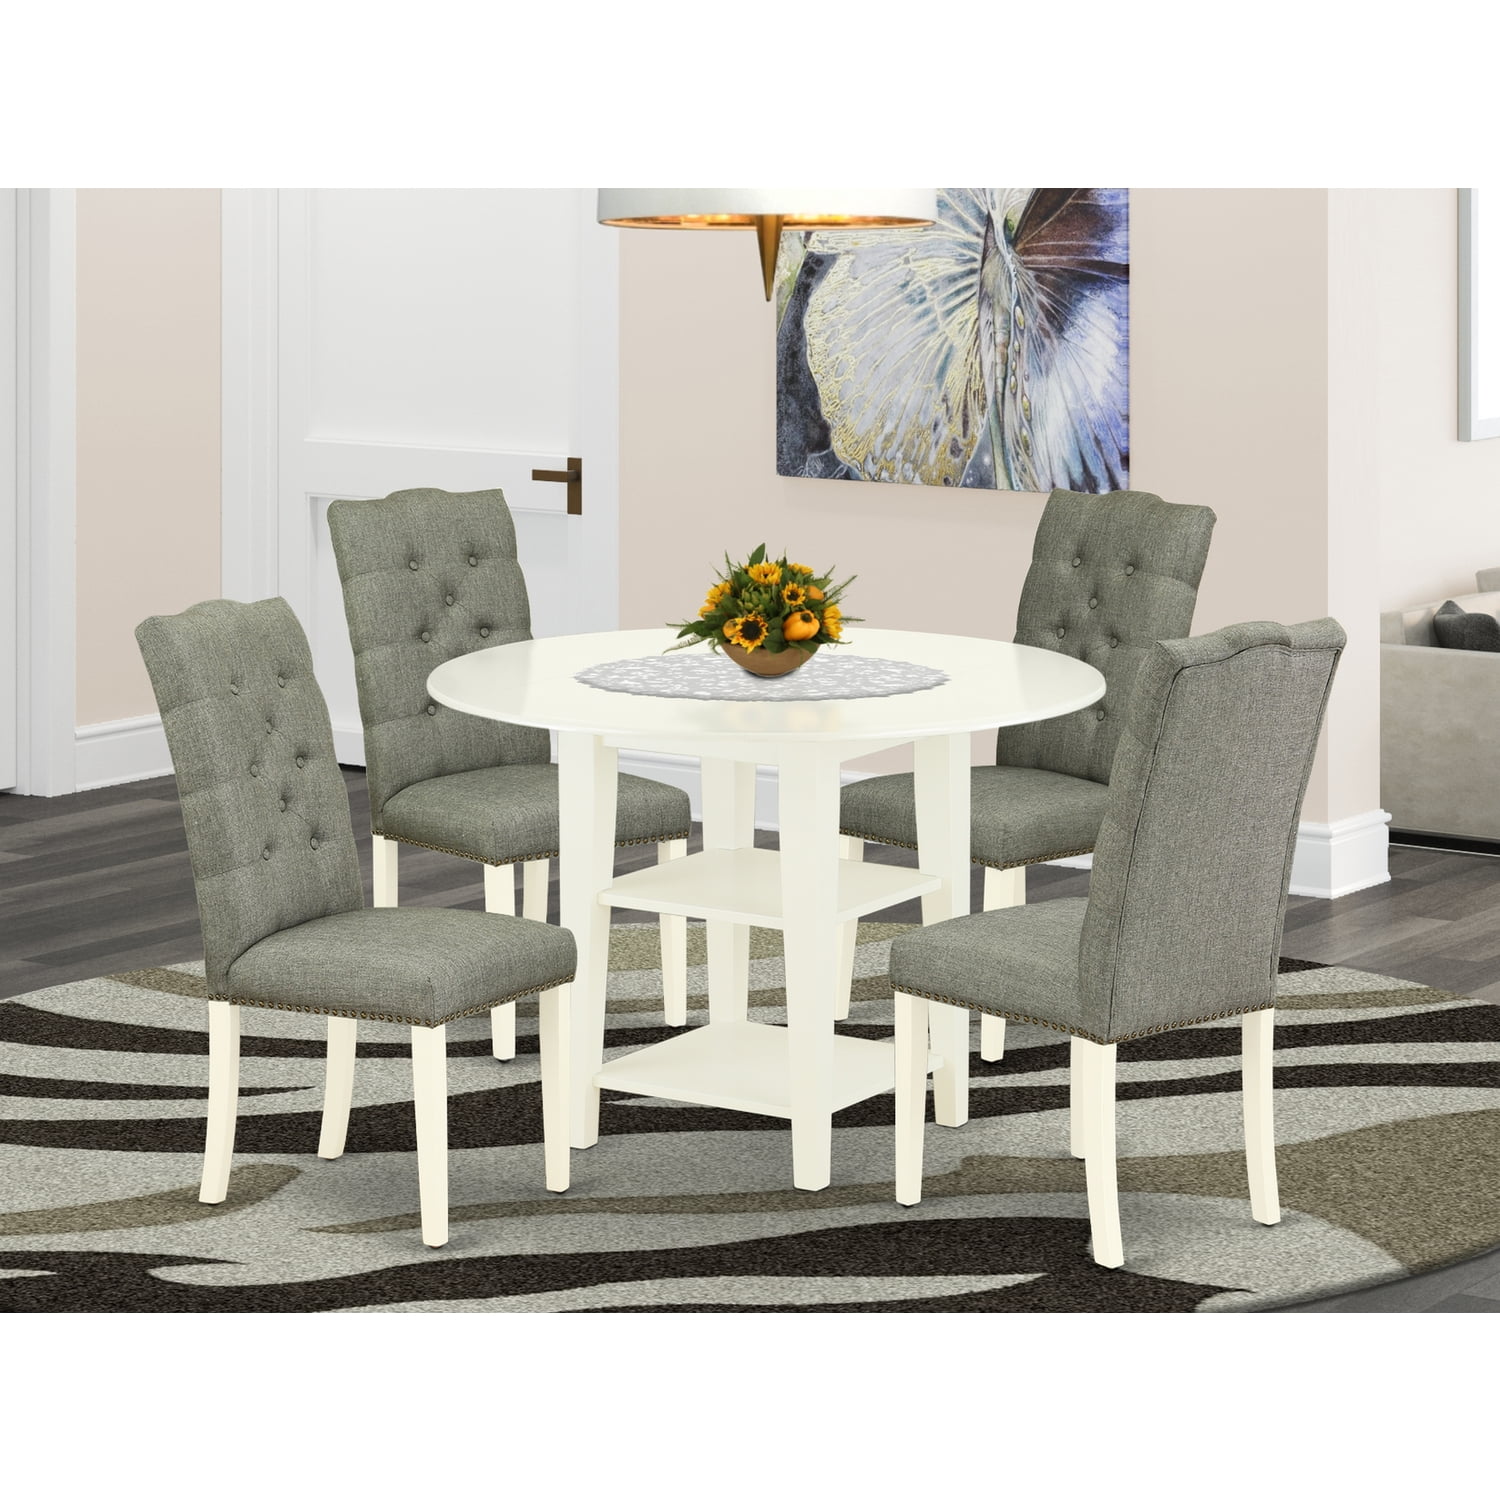 5 Piece Dining Table Set, Small Round White Dining Table Set